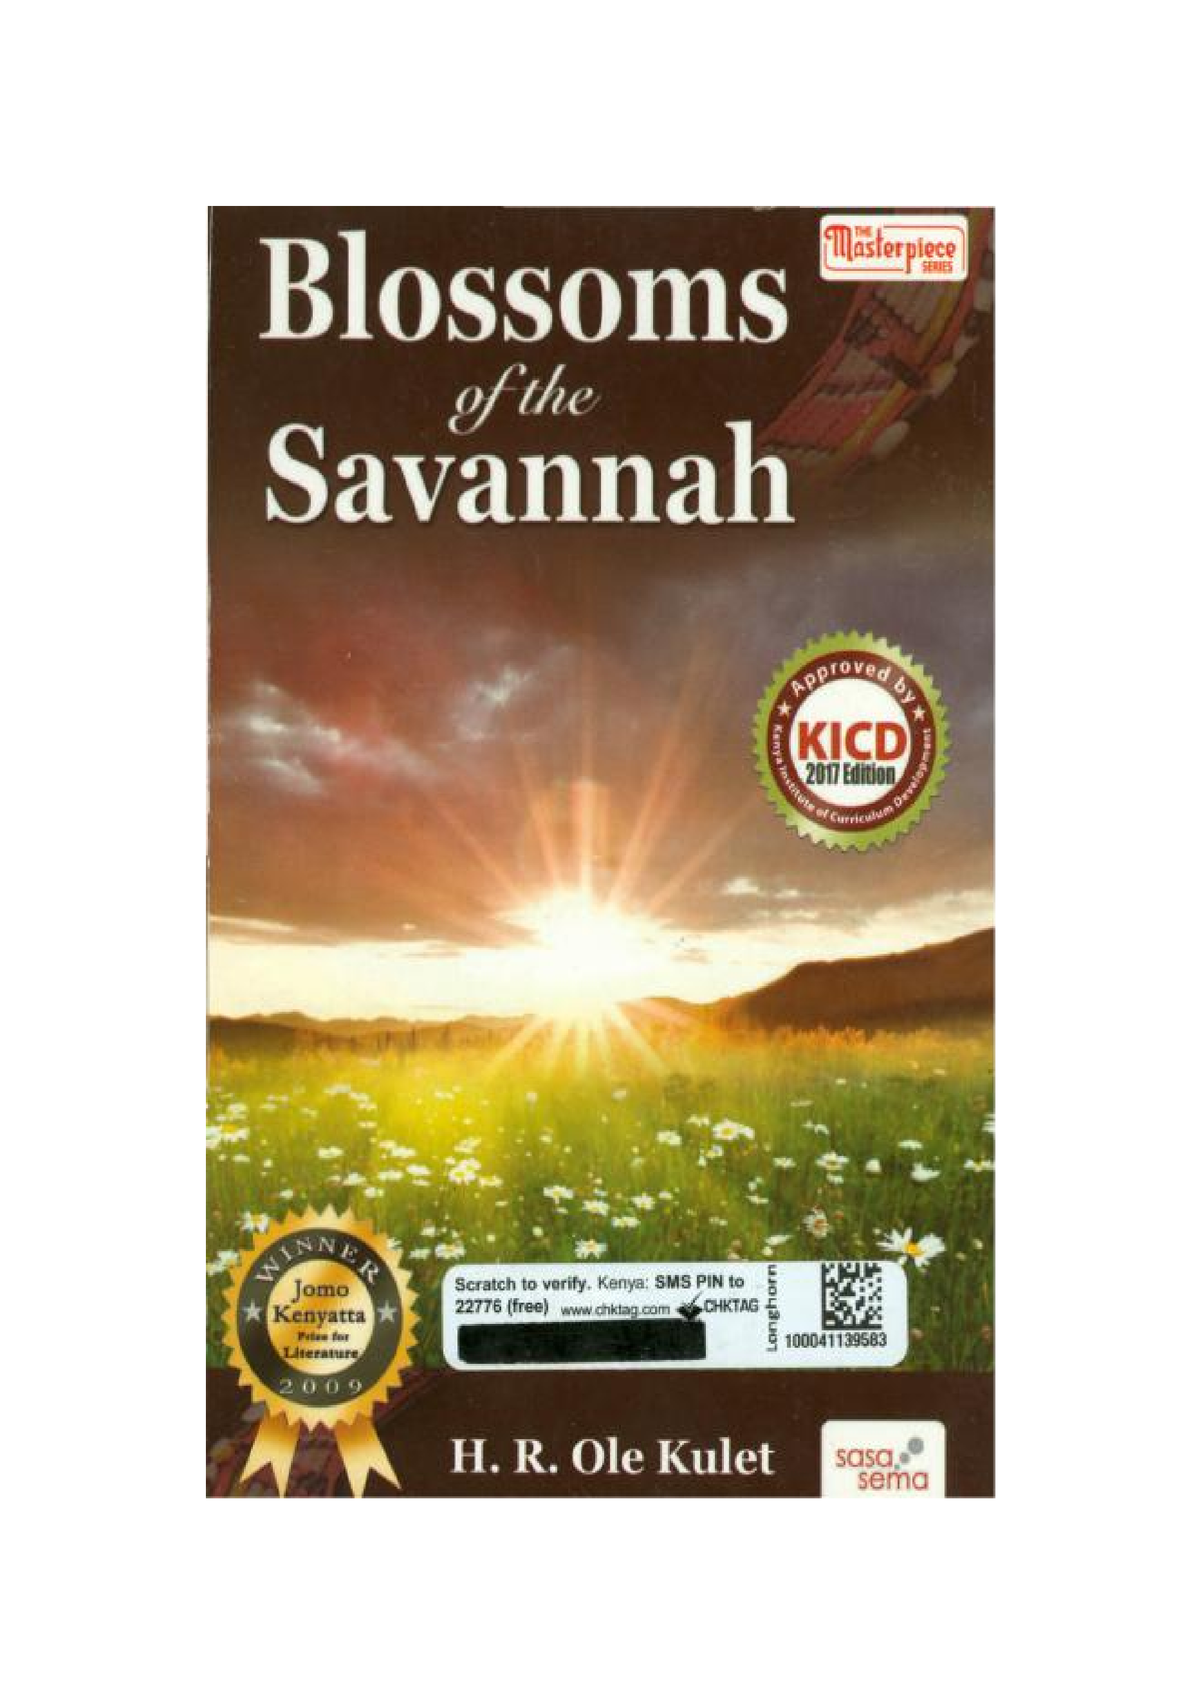 write a book review of the blossoms of the savannah